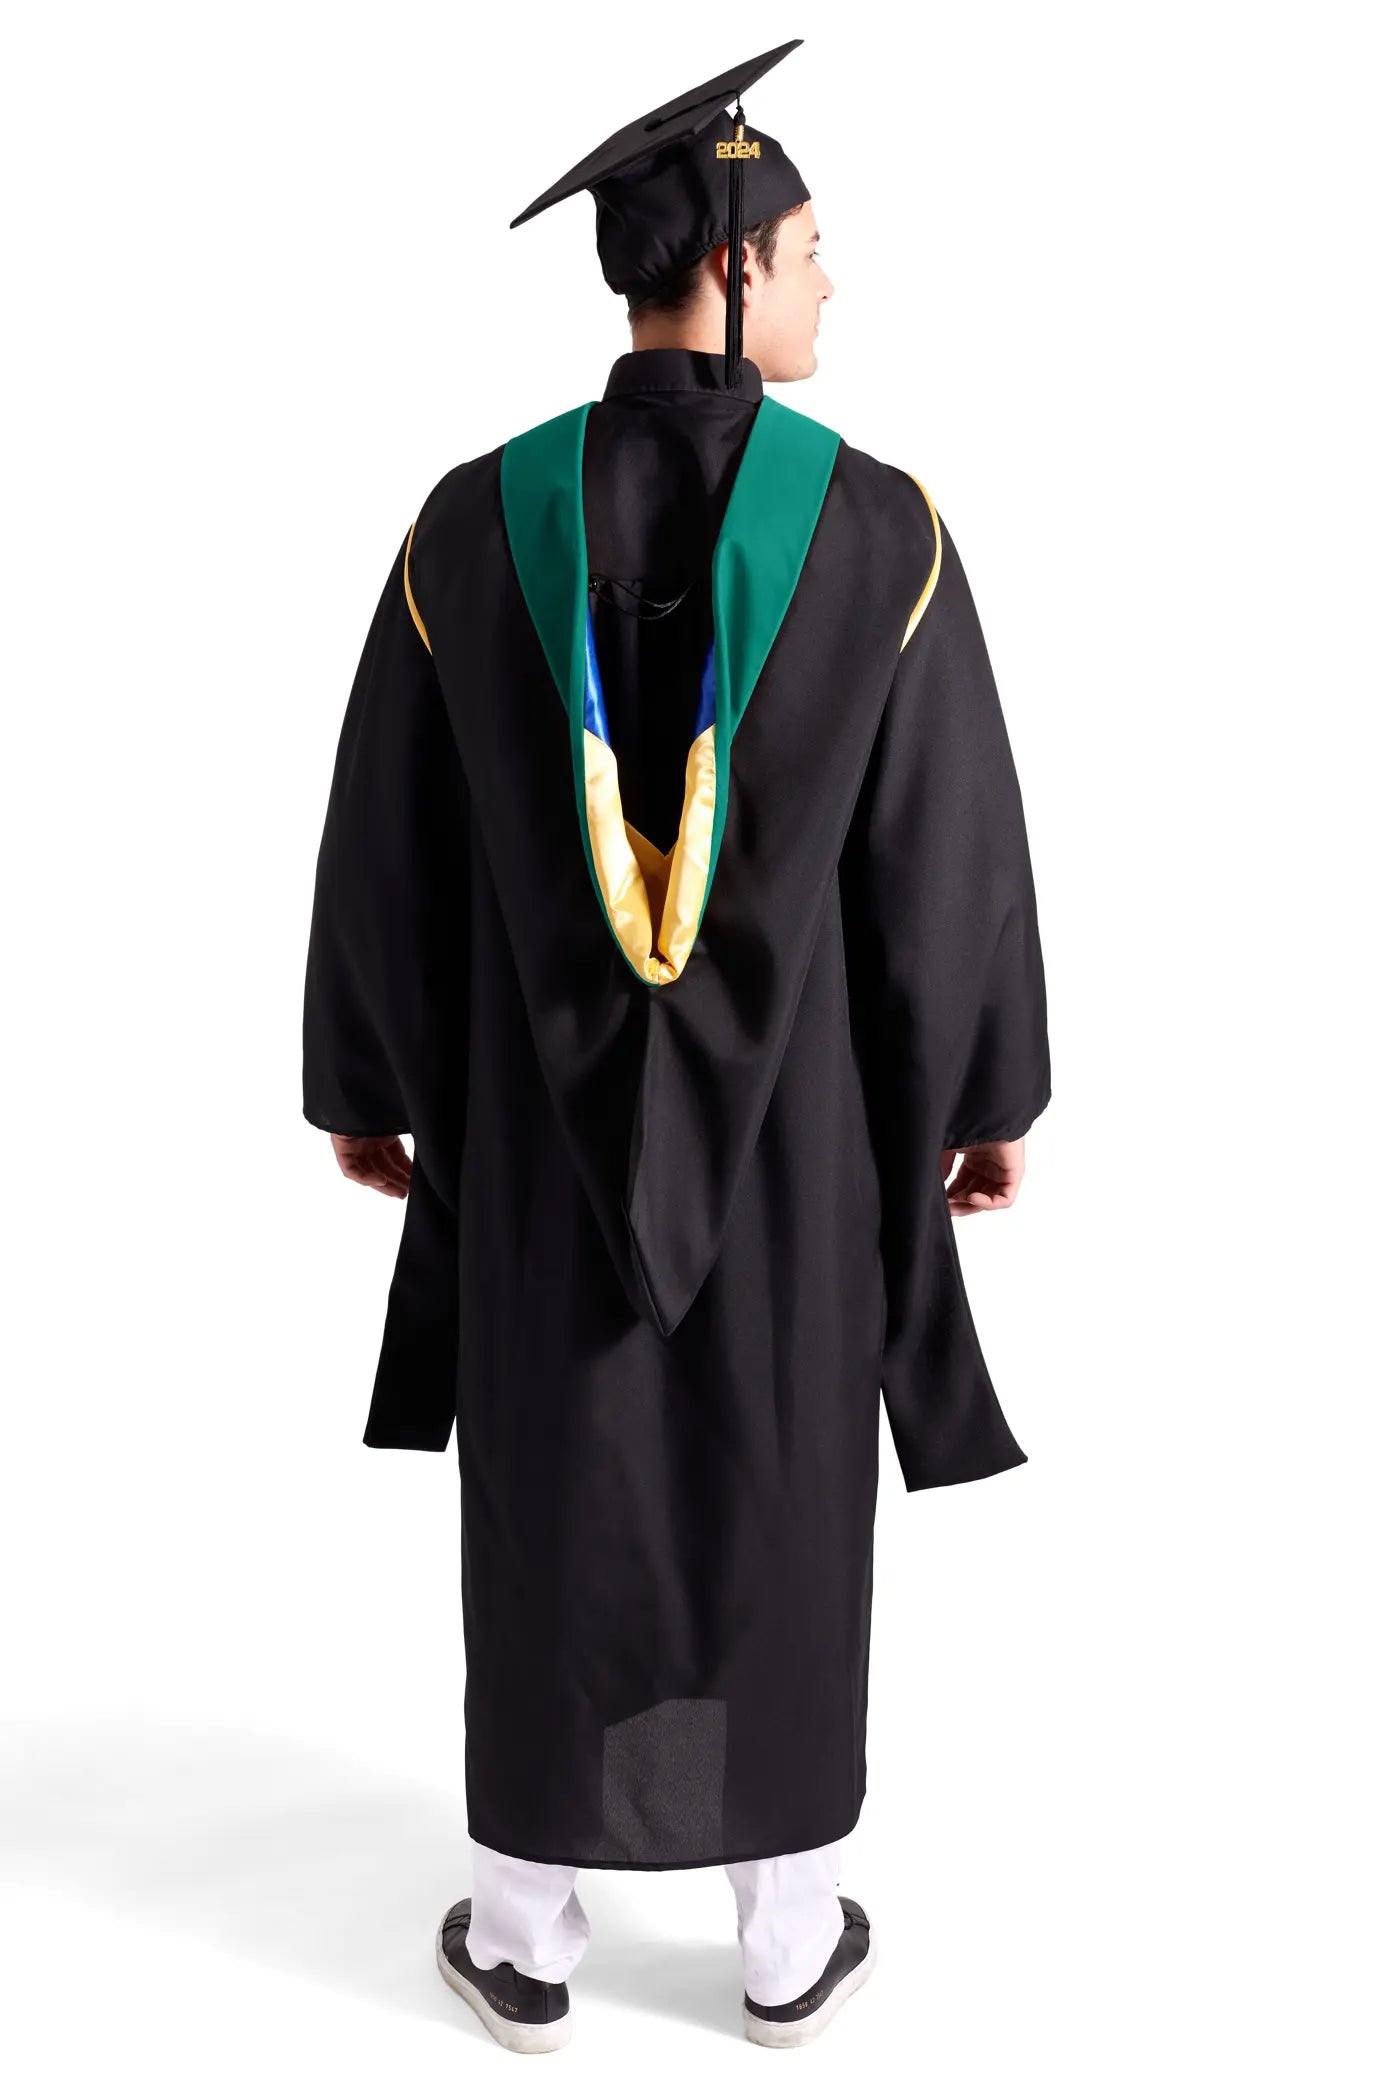 HAPPY TASSEL | UC Riverside Master's Regalia Set, include master's gown with pockets, mortarboard cap, peacock blue hood, and tassel with year charm. | Public Policy Degree